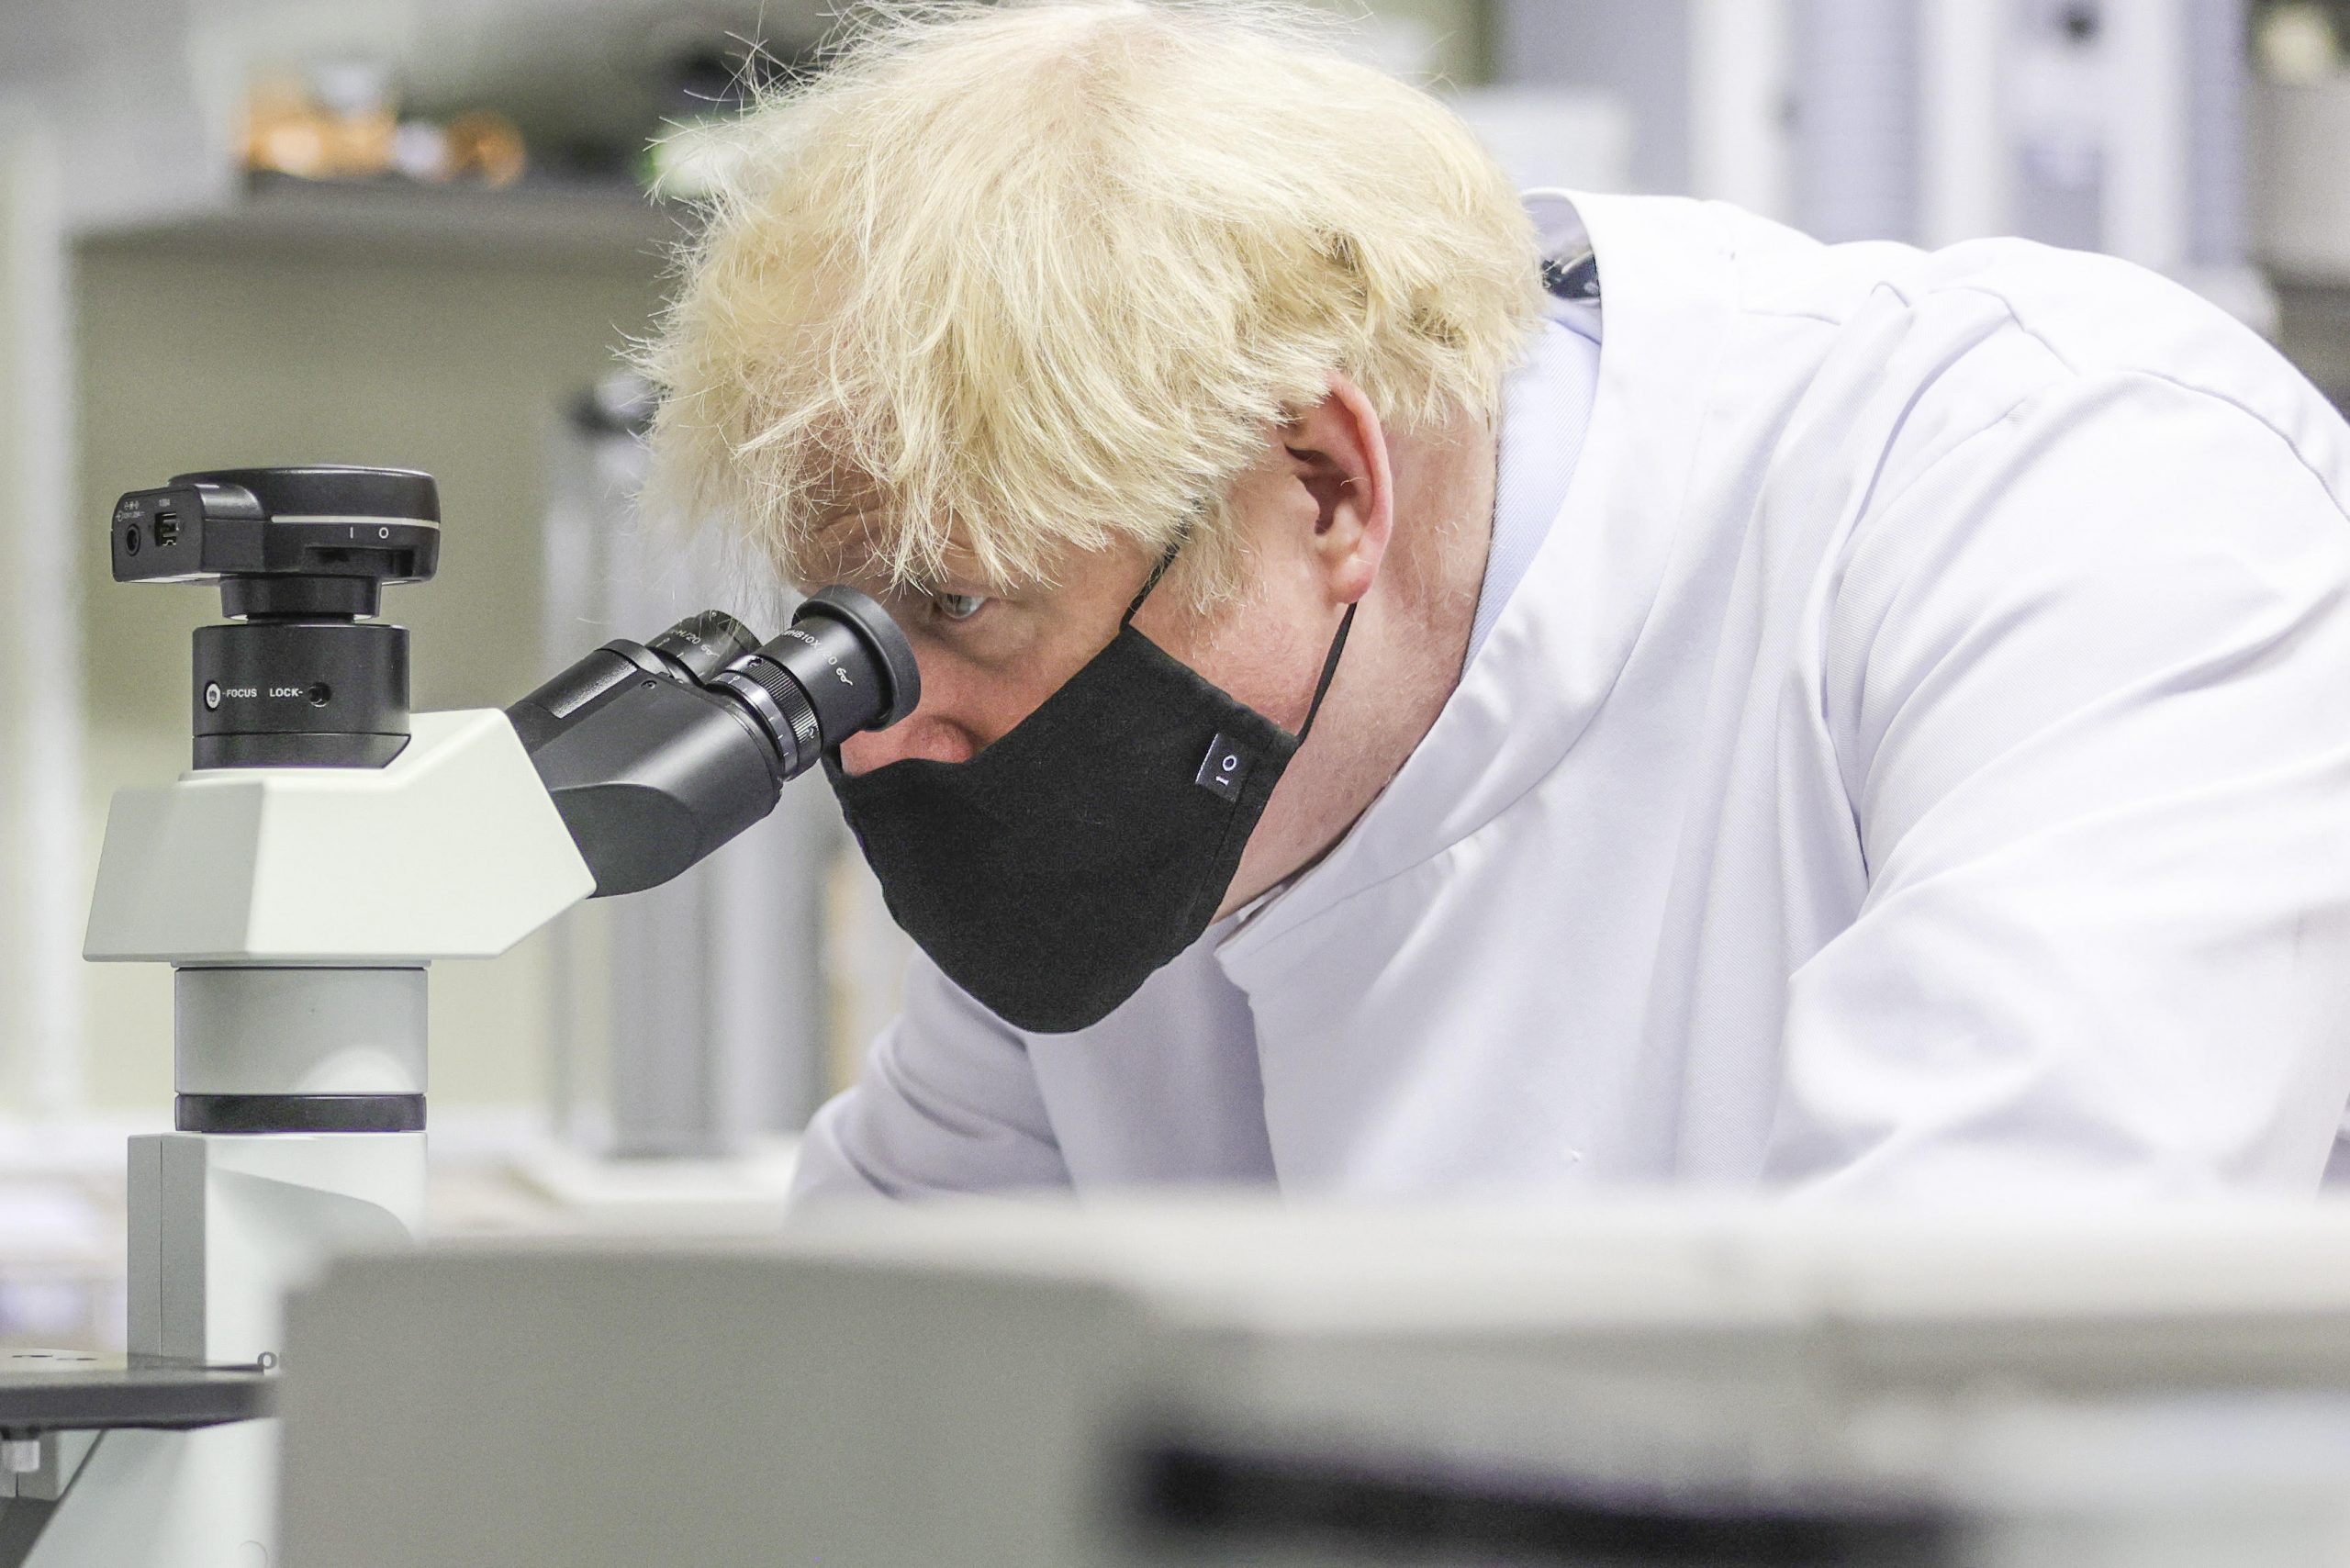 21/06/2021. South Mimms, United Kingdom. Prime Minister Boris Johnson visits MHRA Labs. The Prime Minister Boris Johnson visit MHRA Labs in South Mimms during Covid-19. Picture by Andrew Parsons / No 10 Downing Street